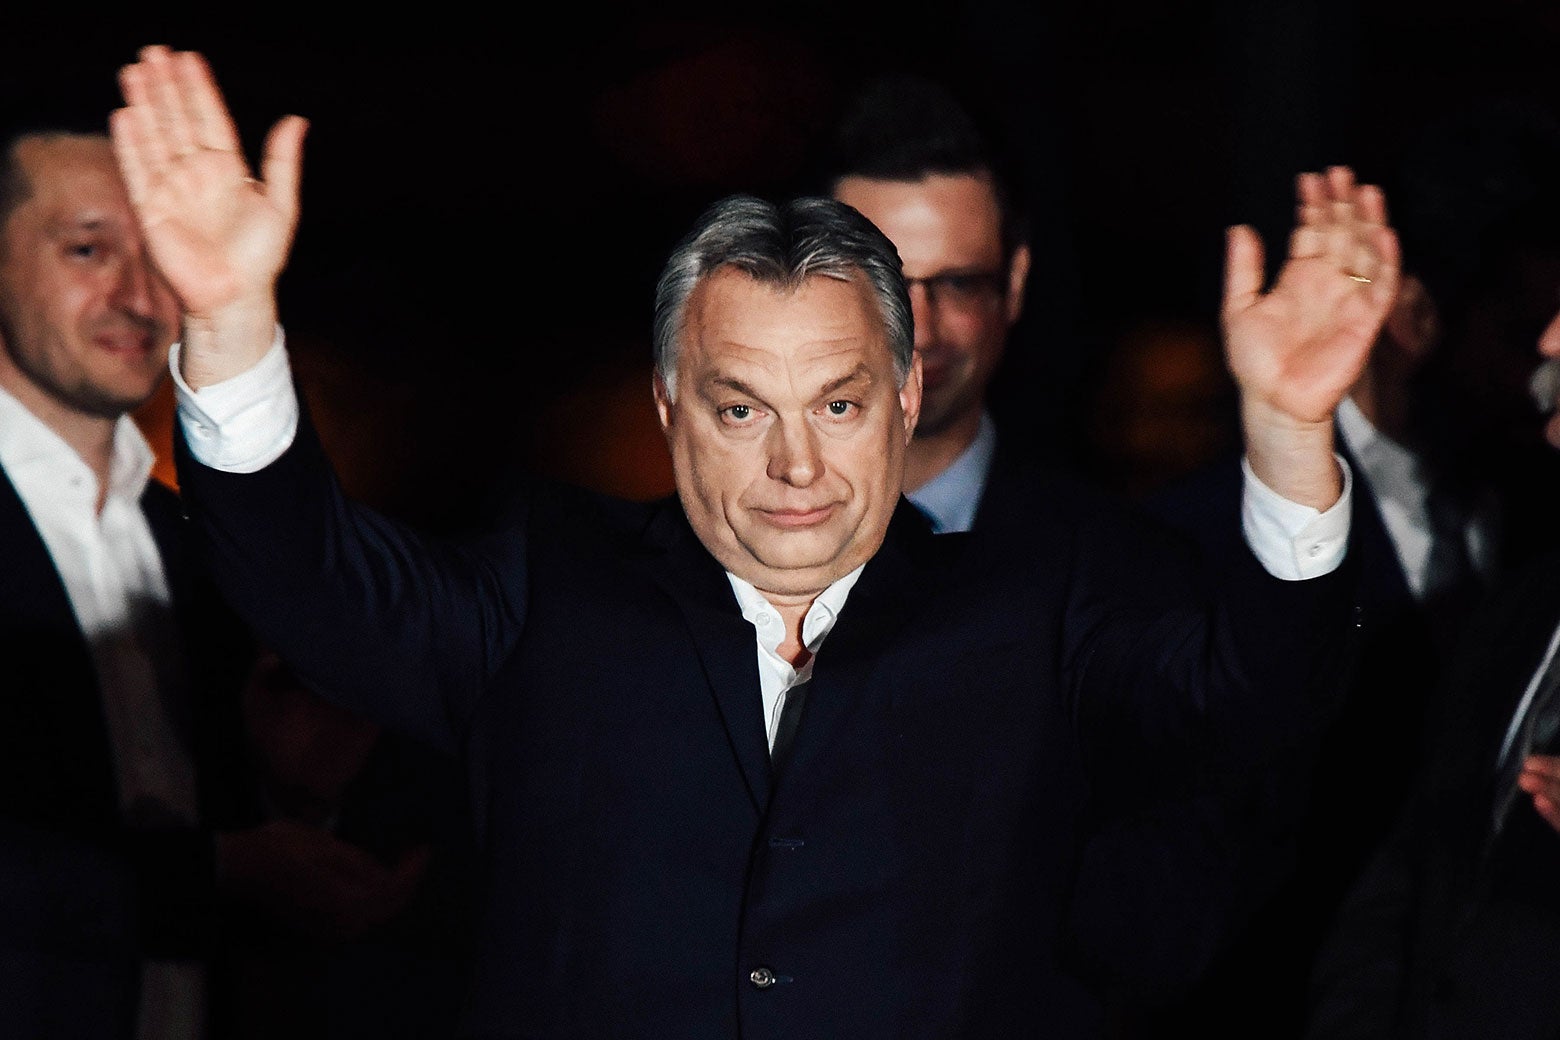 Hungarian Prime Minister Viktor Orbán celebrates on a podium on the bank of the Danube River after winning the parliamentary election with members of his Fidesz party on Sunday in Budapest, Hungary.